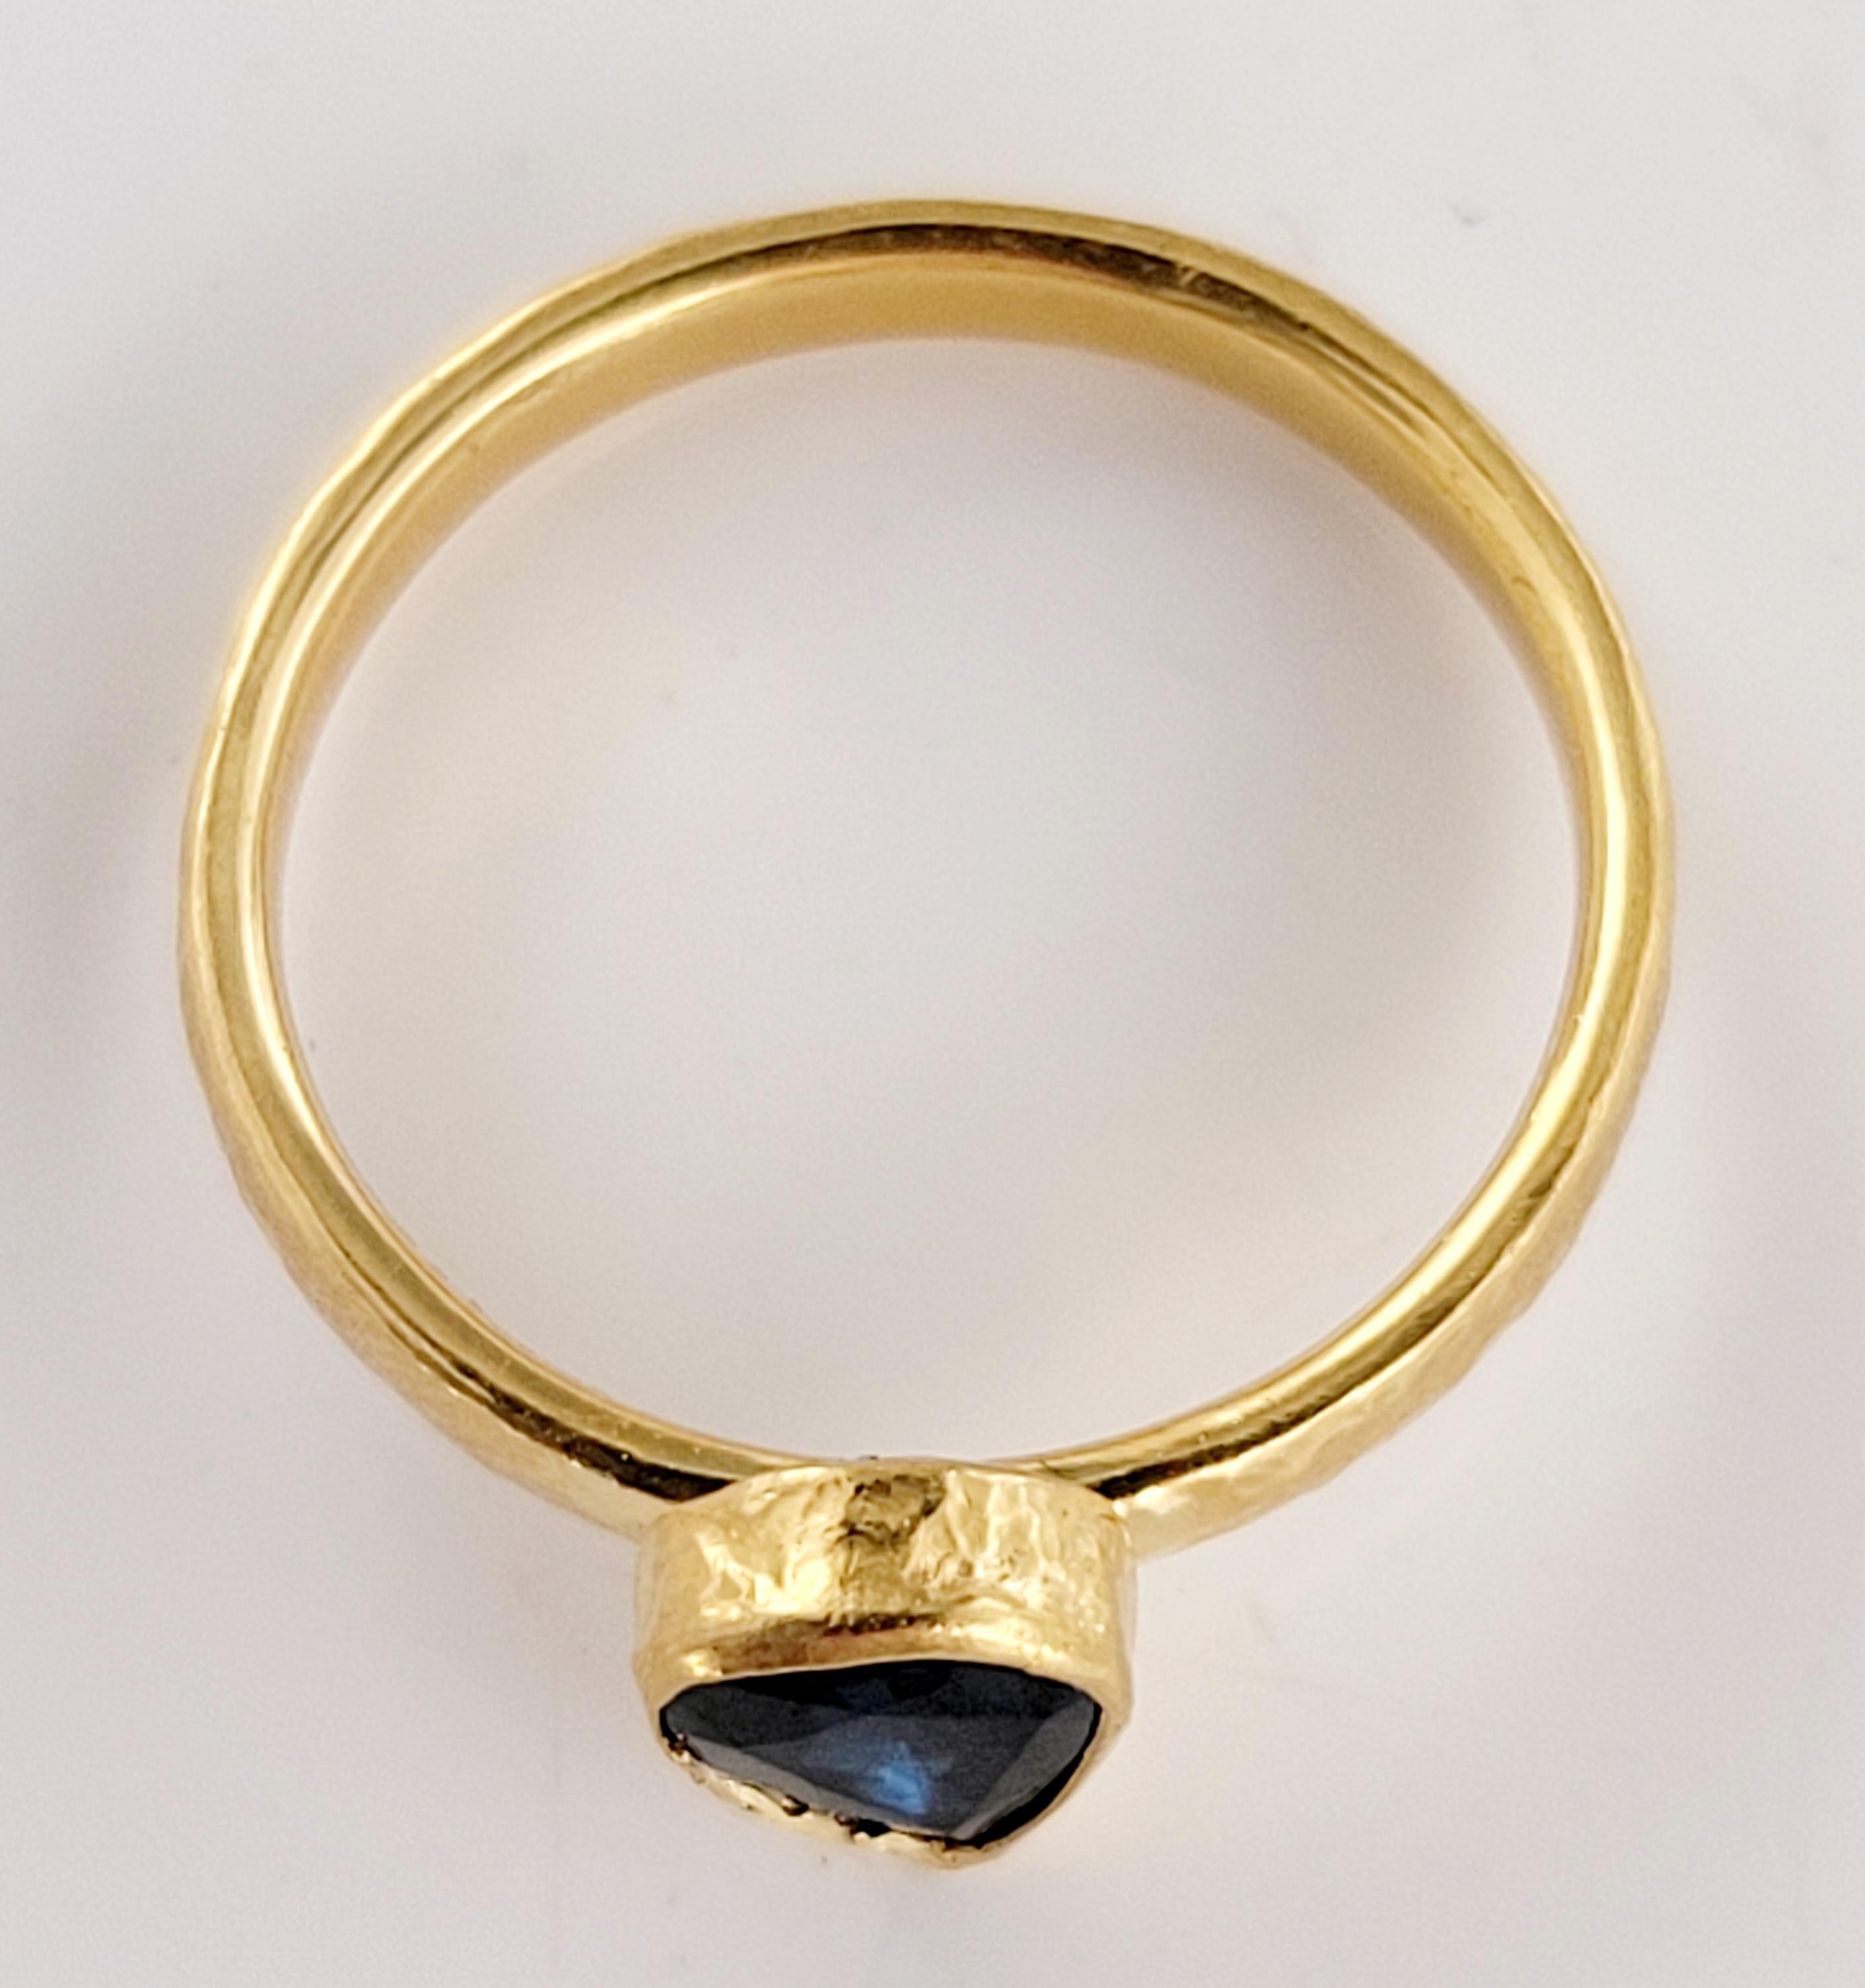 Unbranded Ring
Designed by Gurhan 
Type Ring 
Material 24K Yellow Gold 
Blue Sapphire Stone 
Pear Cut Stone
Ring Size 6.5
Ring Weight 3.5gr 
Condition New, never worn